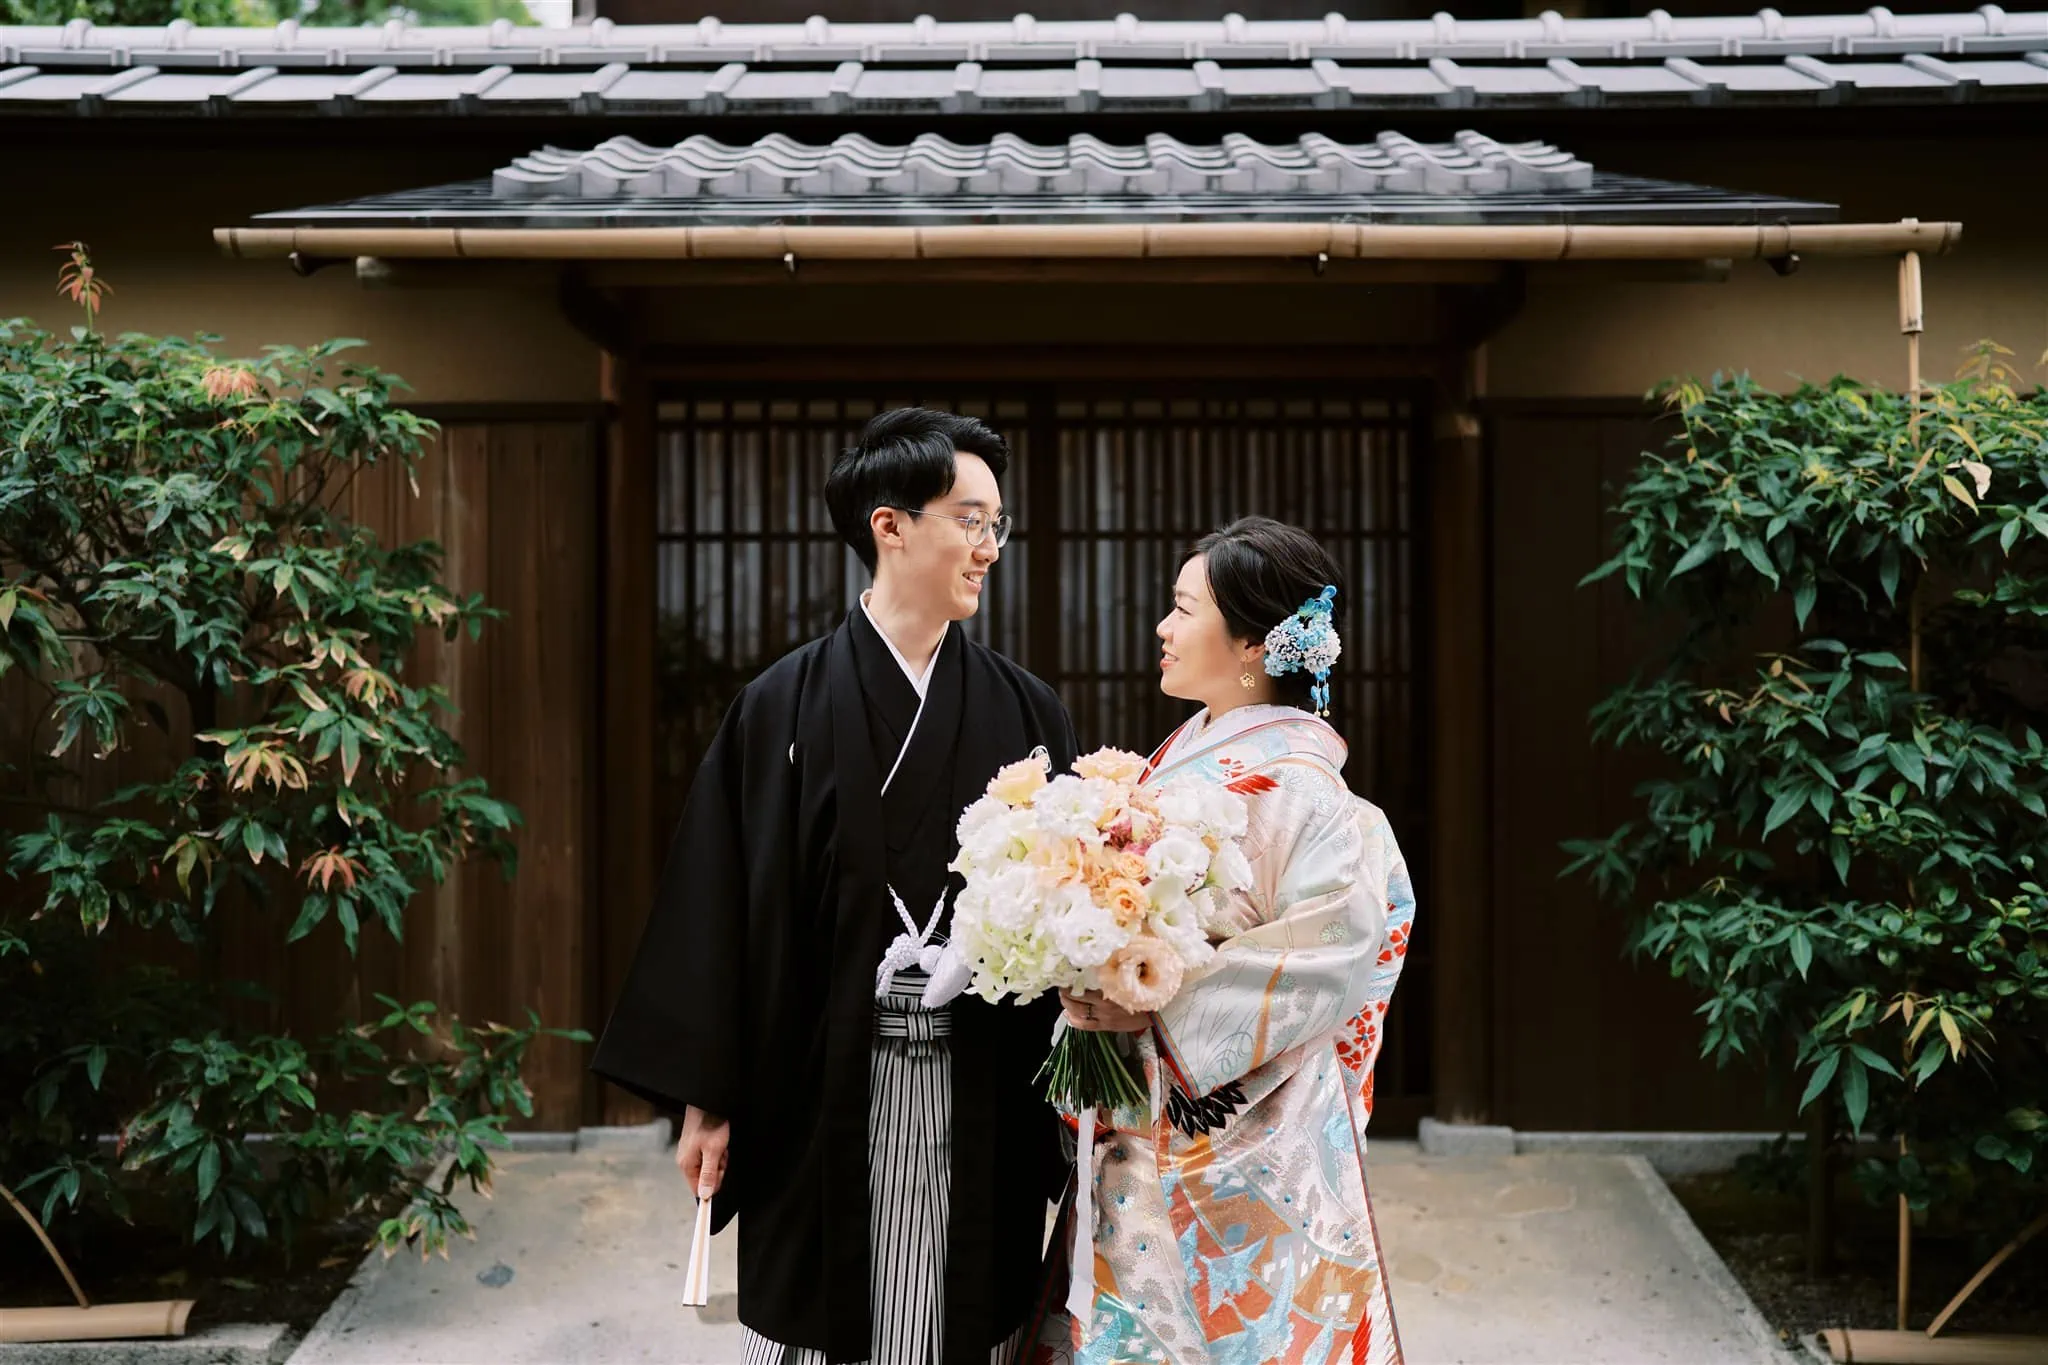 Kyoto Tokyo Japan Elopement Wedding Photographer, Planner & Videographer | An elopement photographer captures a bride and groom in traditional Japanese kimono standing in front of a house.